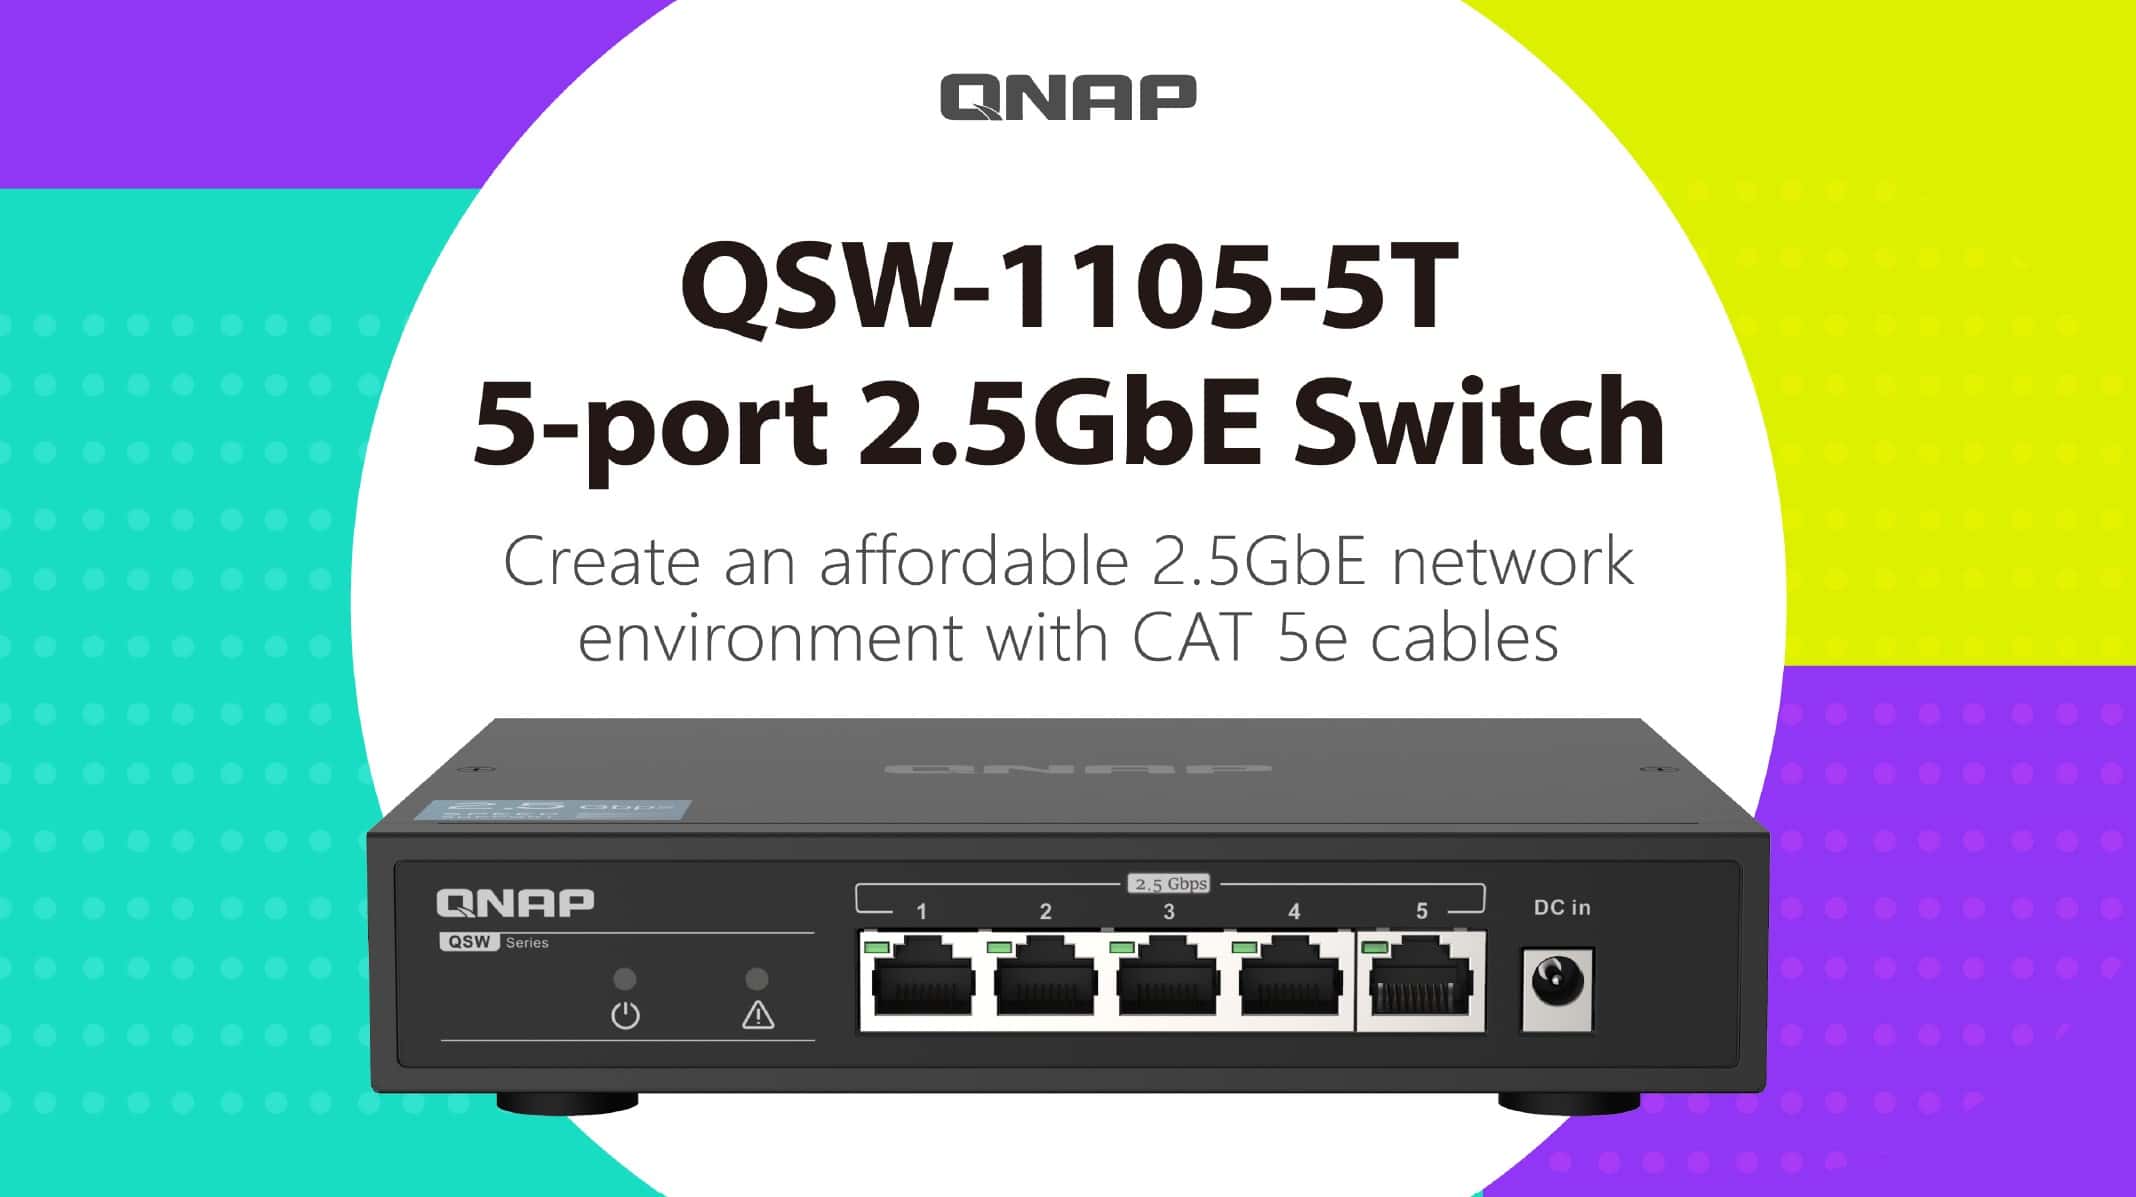 QNAP QSW-1105-5T 5 Port 2.5Gbps Switch Review – The cheapest way to get multi-gig Ethernet right now